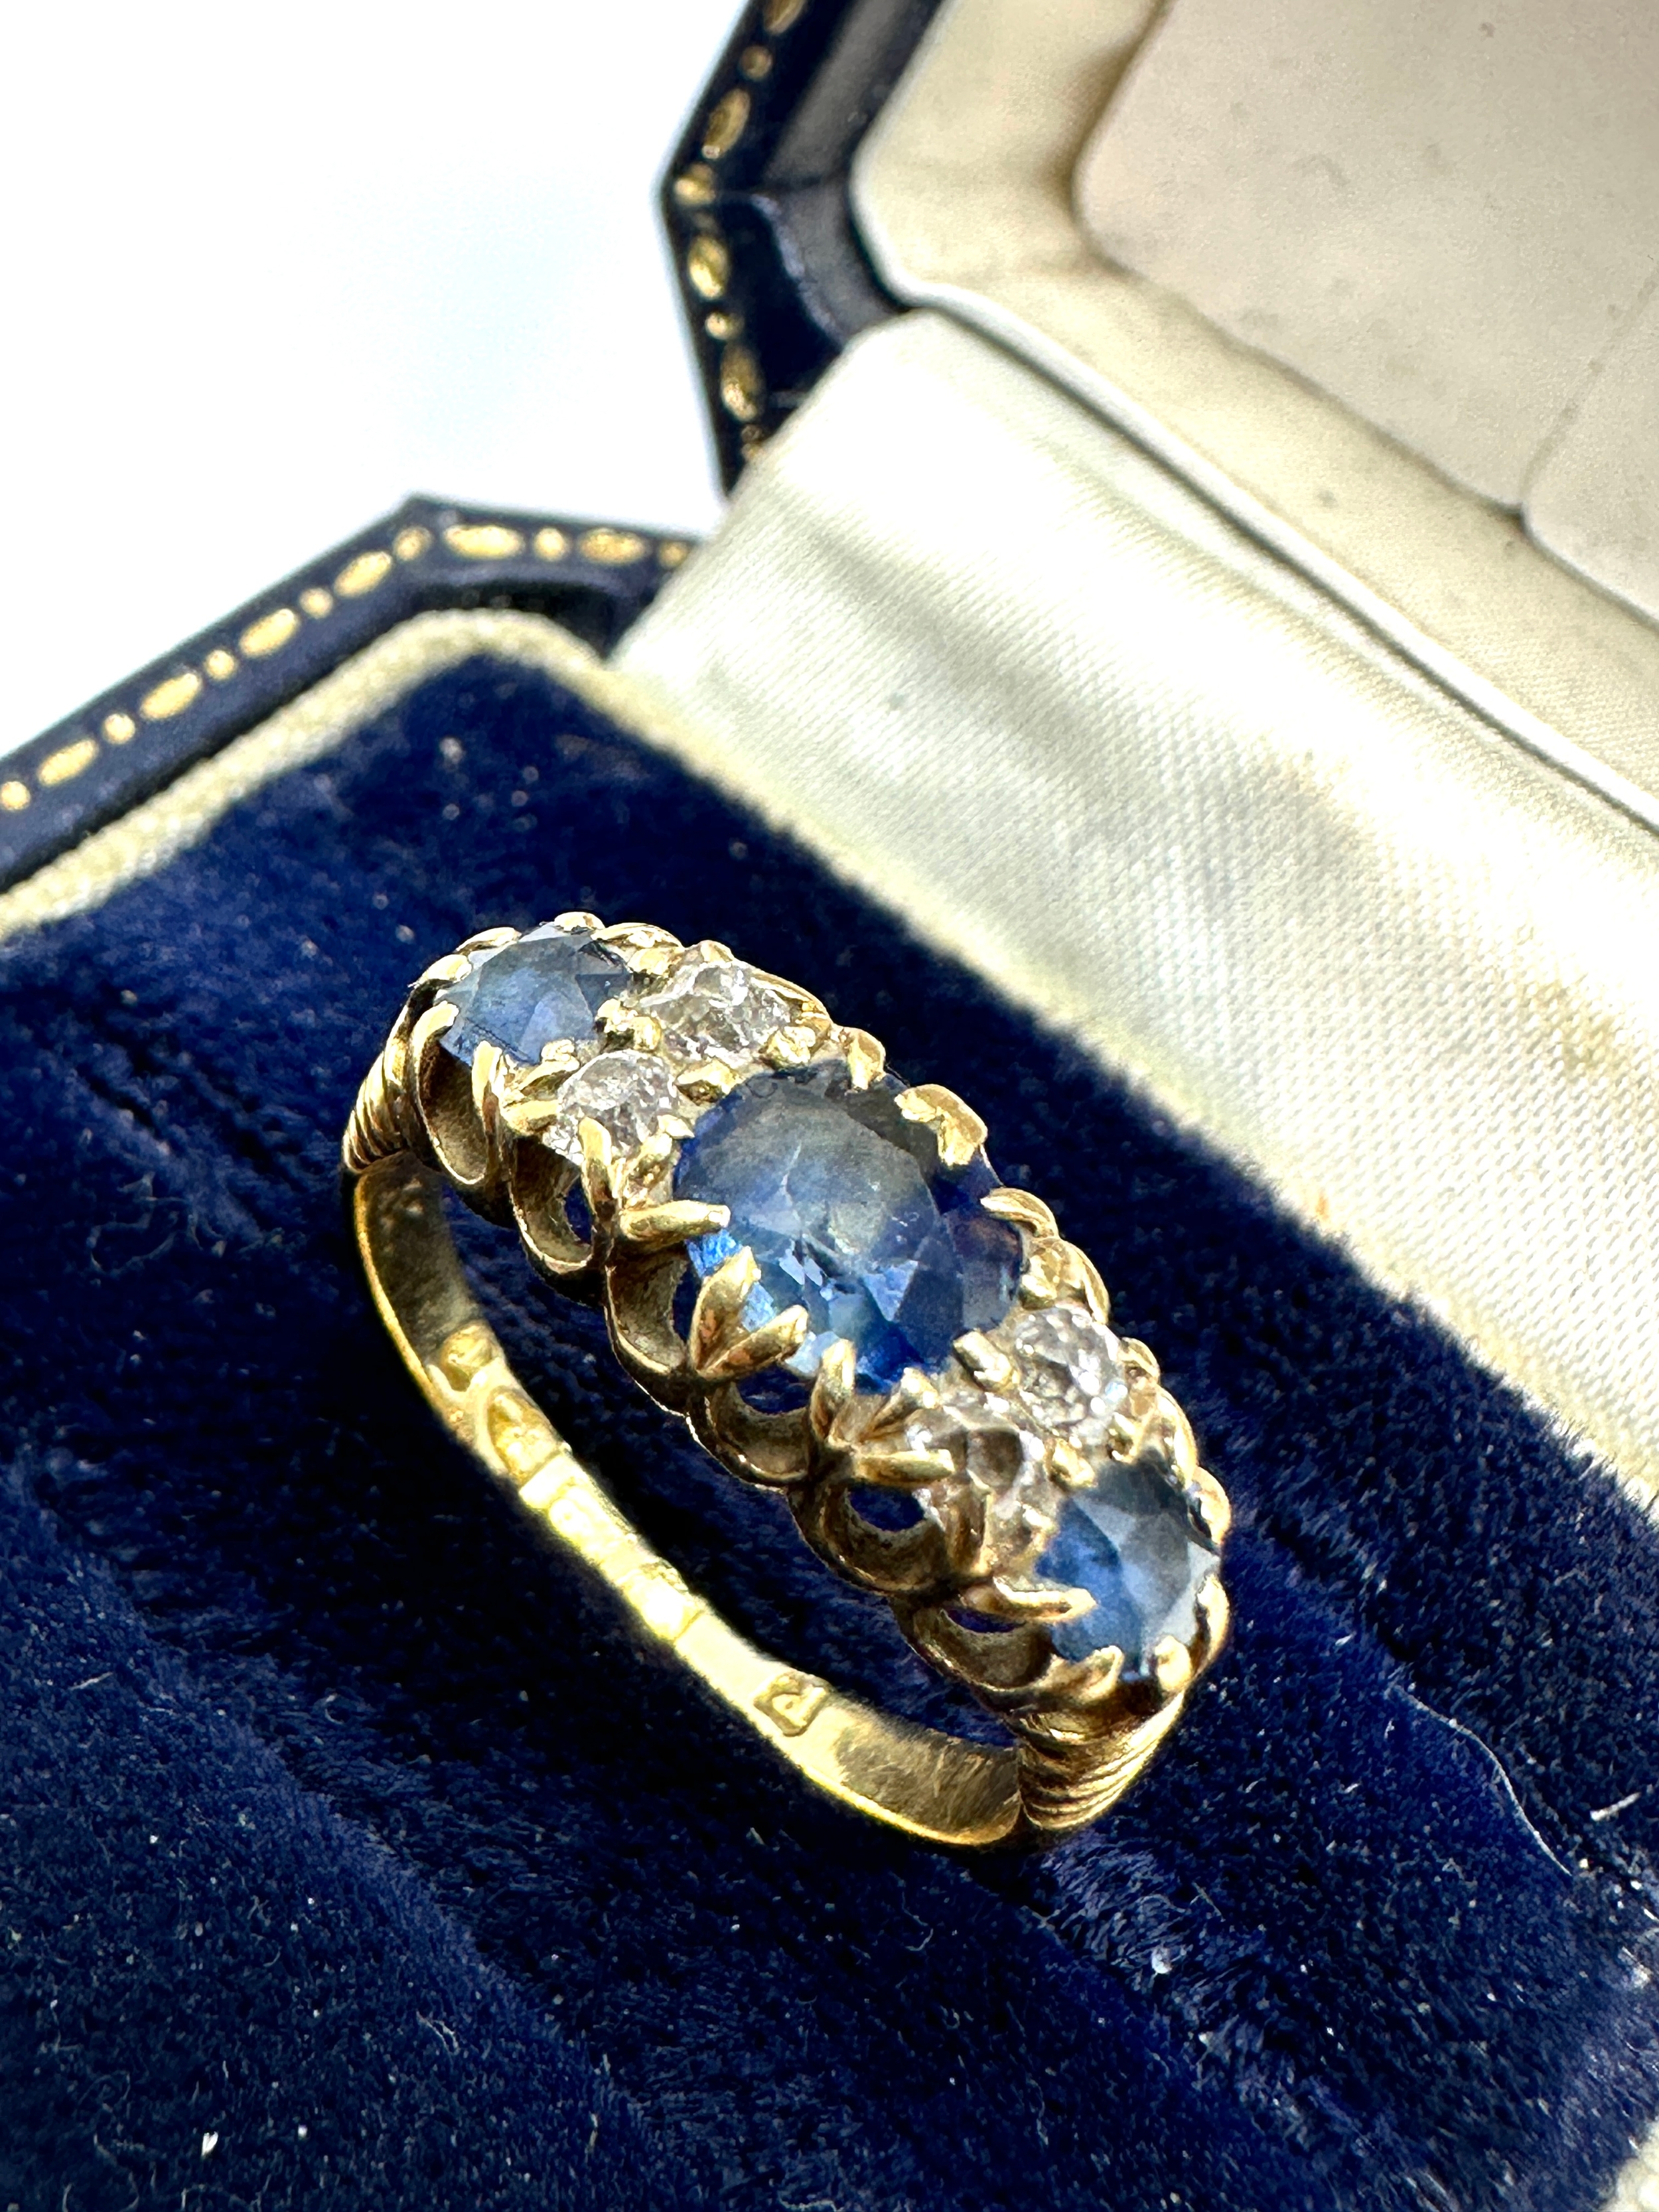 Antique 18ct gold sapphire & diamond ring weight 3.6g - Image 3 of 4